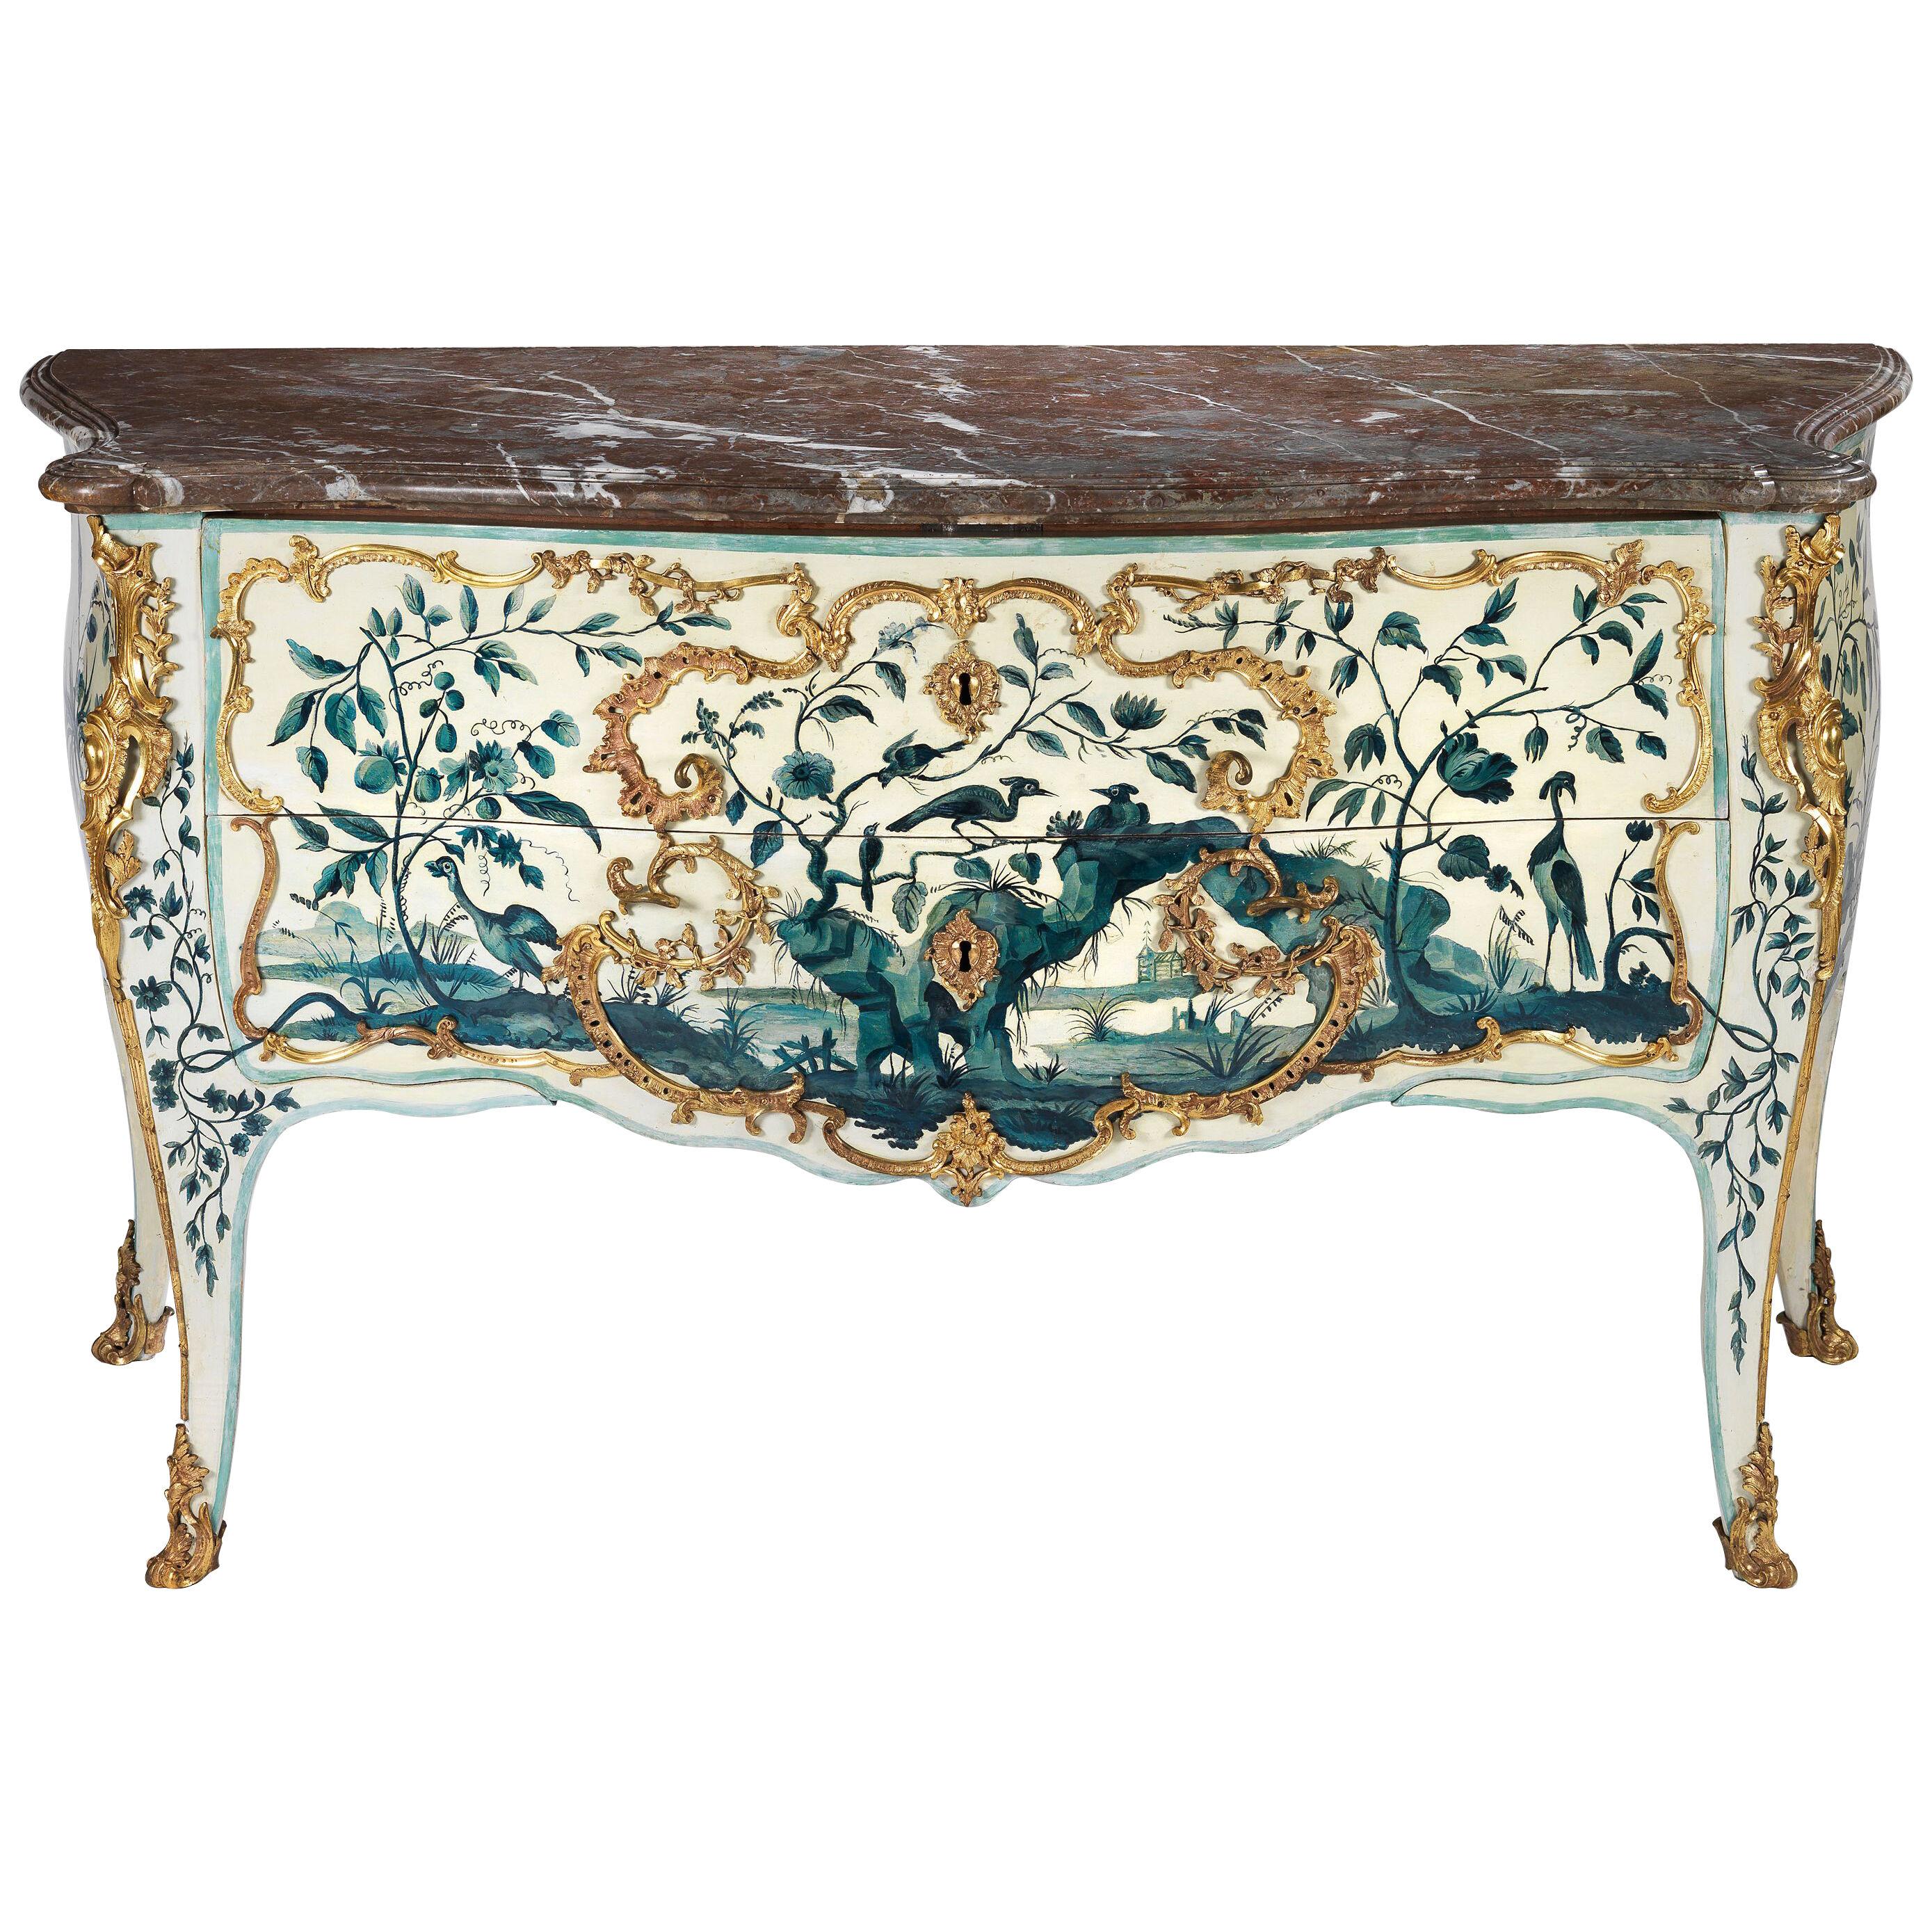 A Highly Important pair of Blue and White Lacquer Commodes by Chevalier